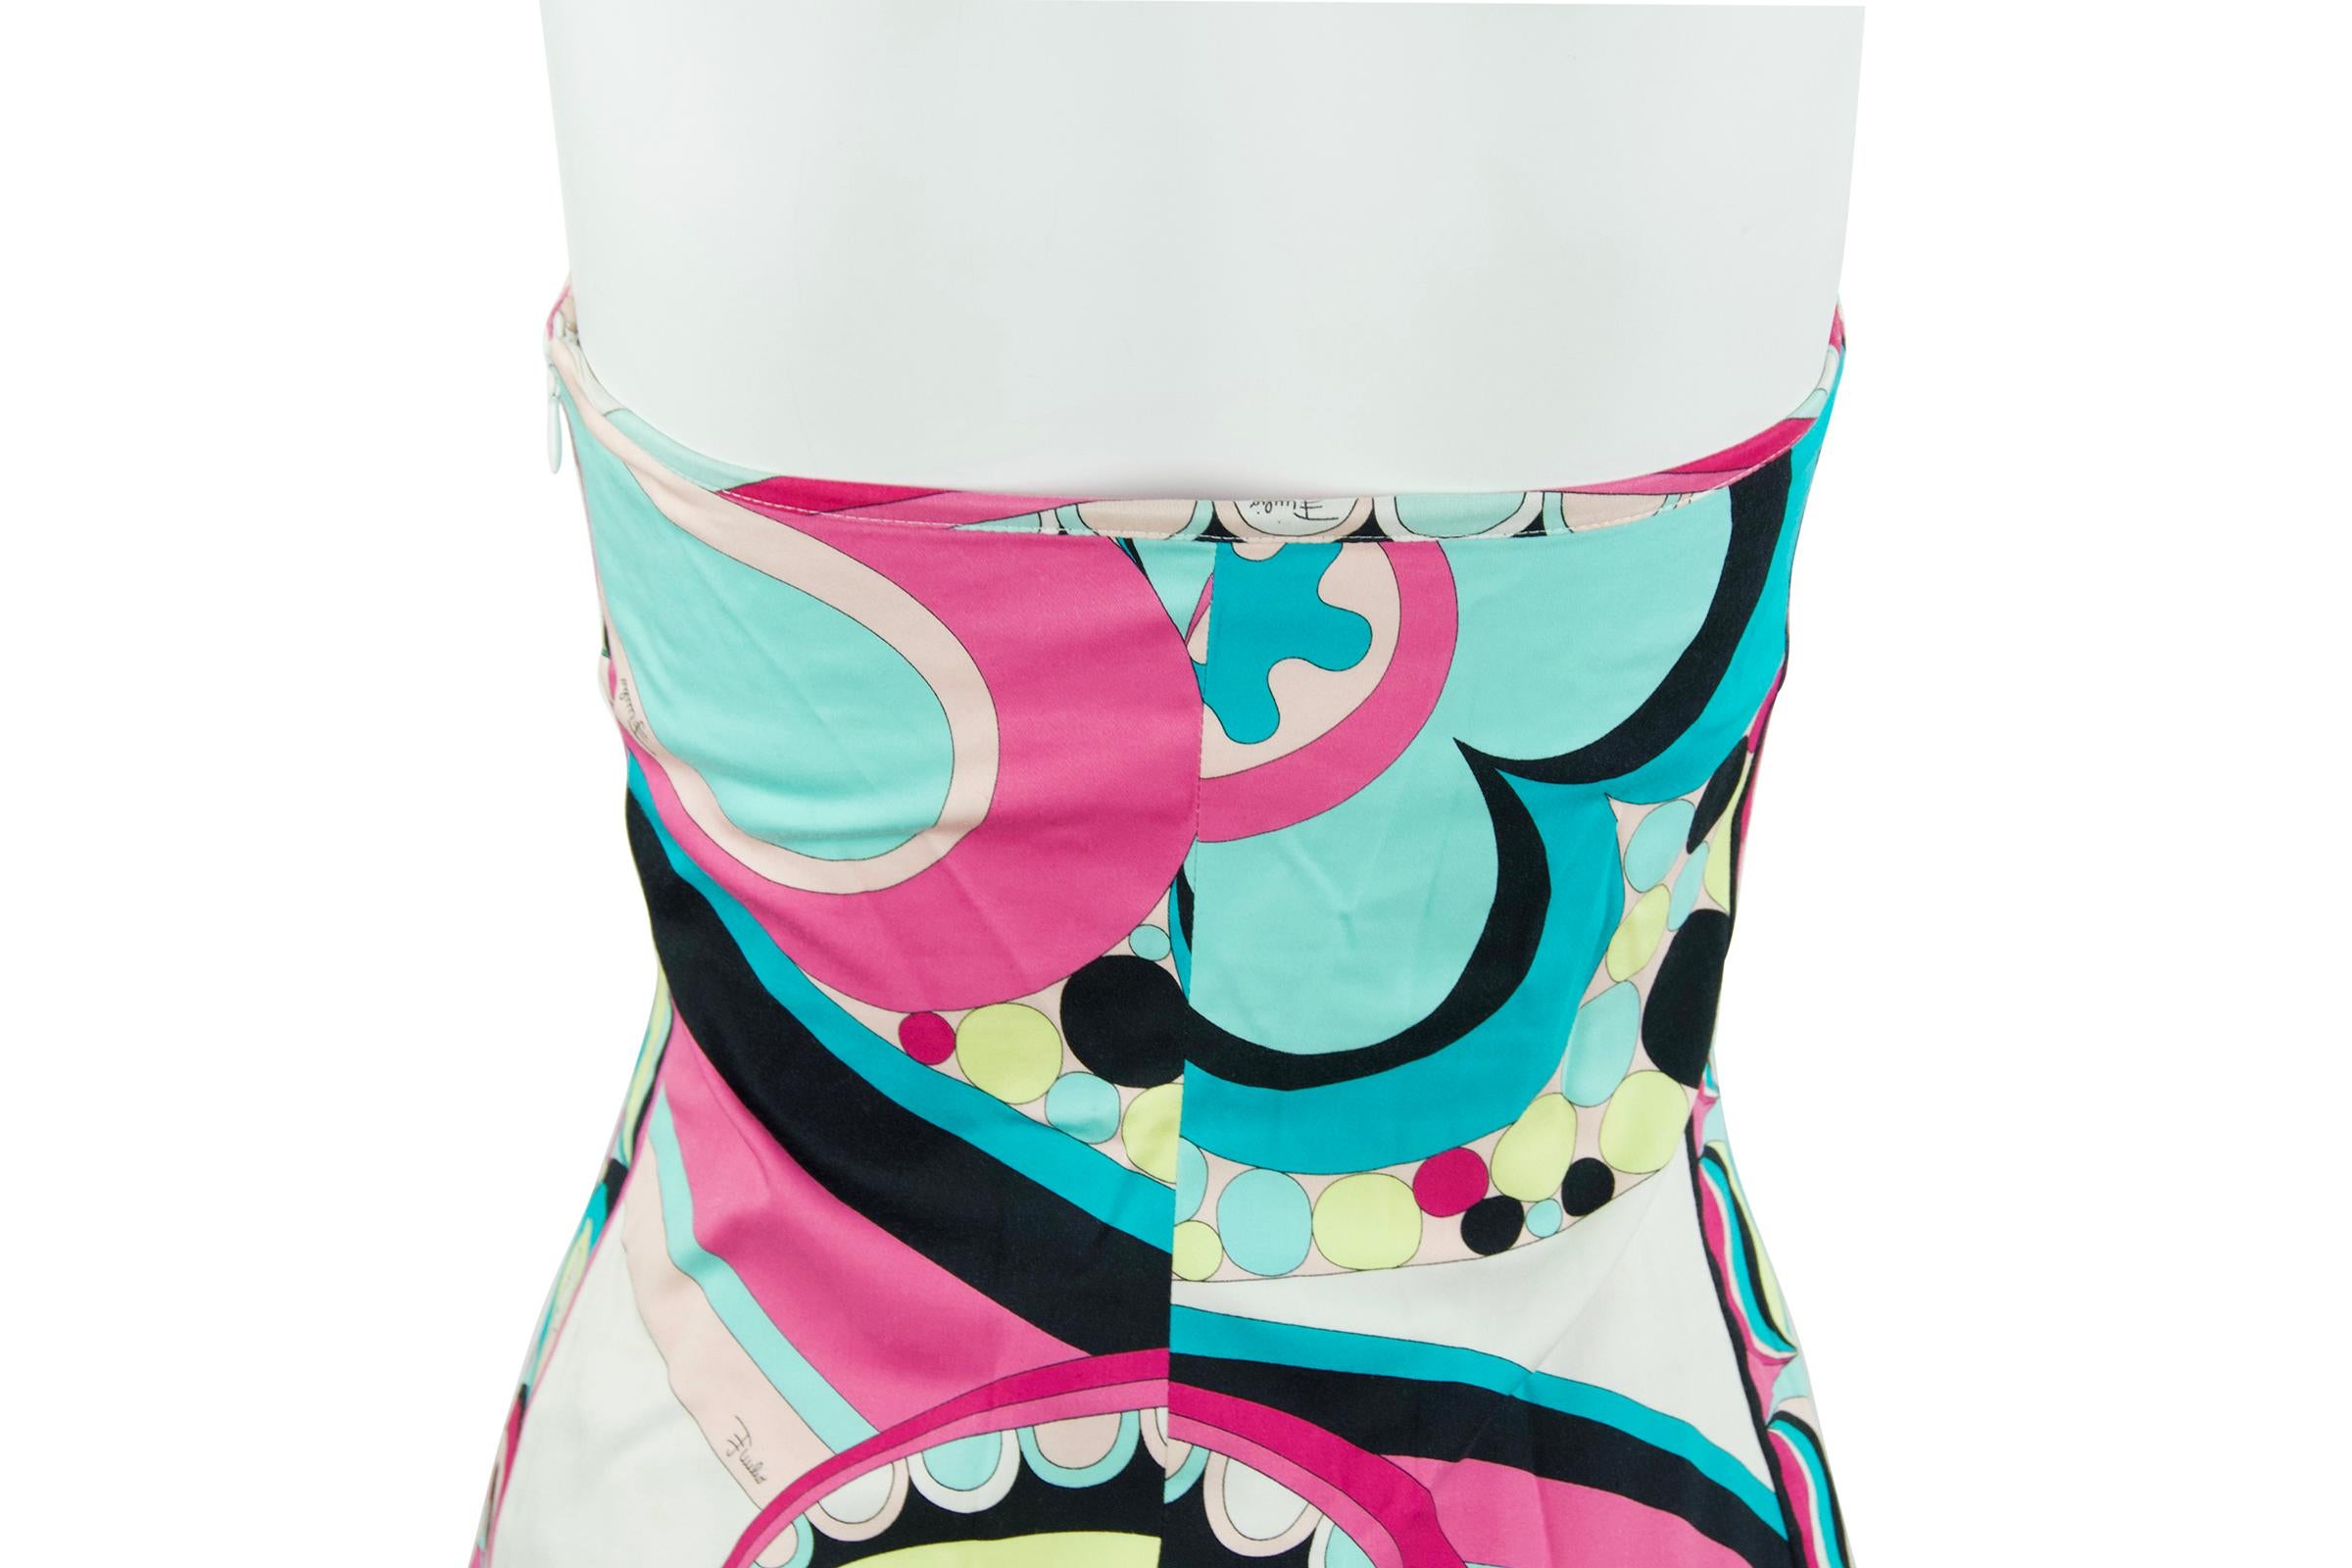 Pucci Multicolored Printed Strapless Dress - Size 6 In Excellent Condition For Sale In Newport, RI